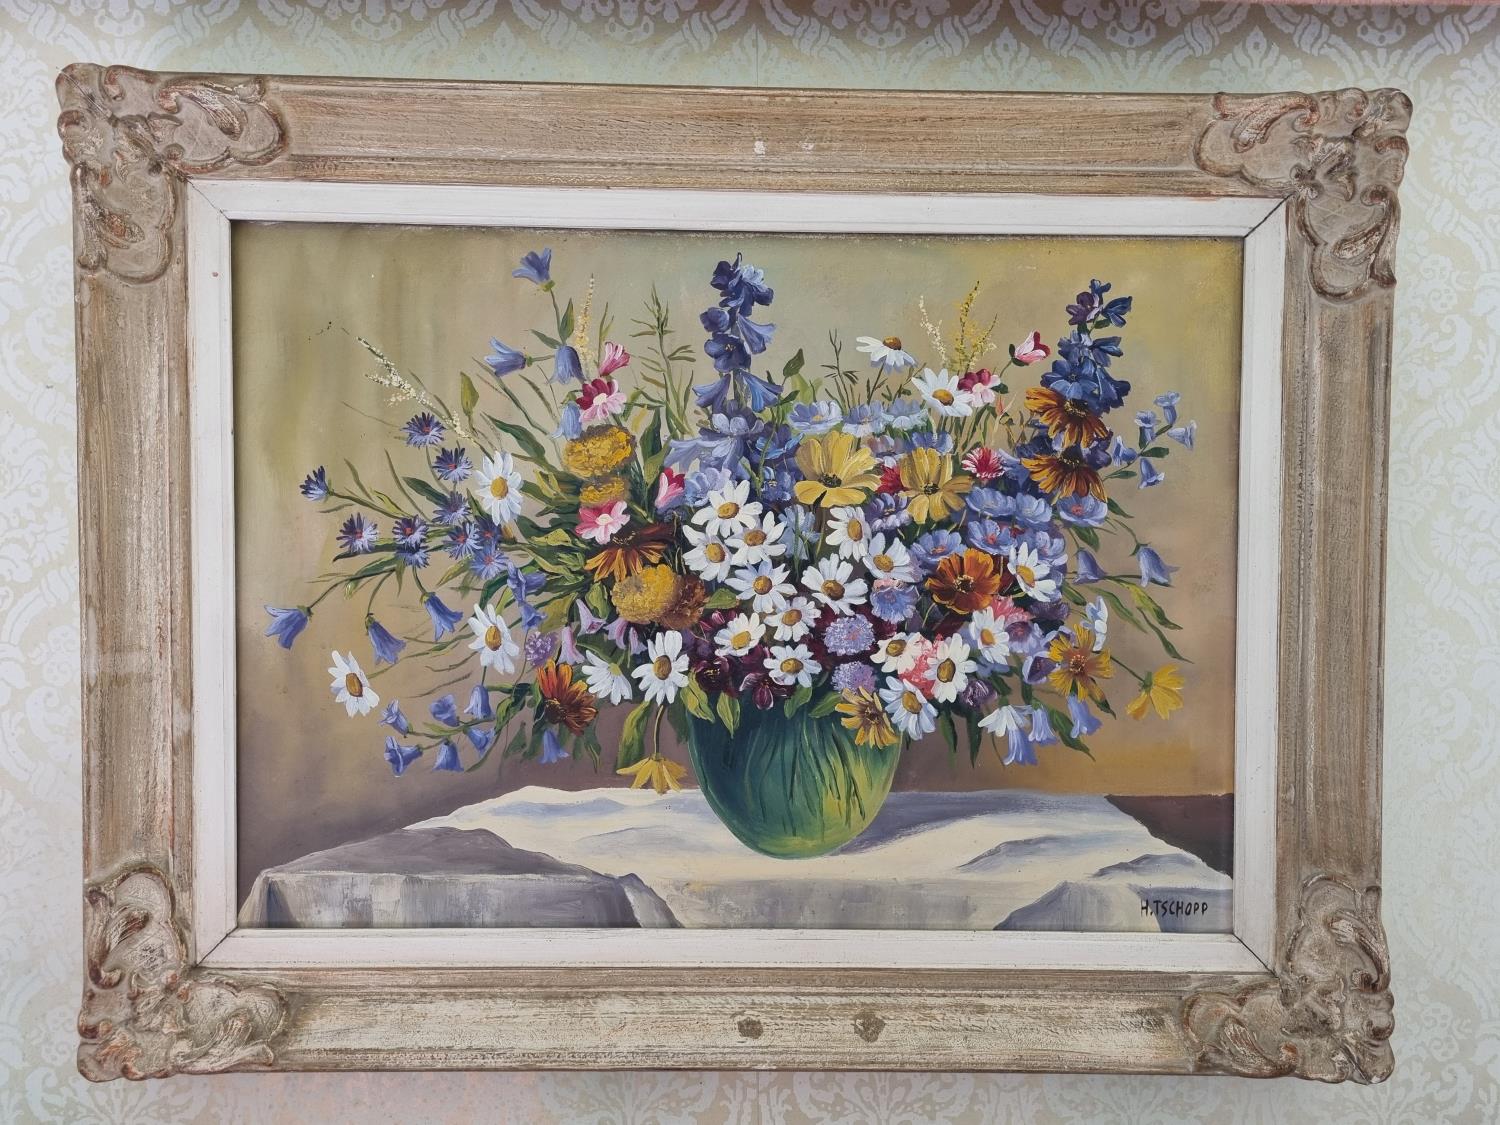 A 20th Century Oil on Canvas still life of wild flowers in a vase on a table setting. Indistinctly